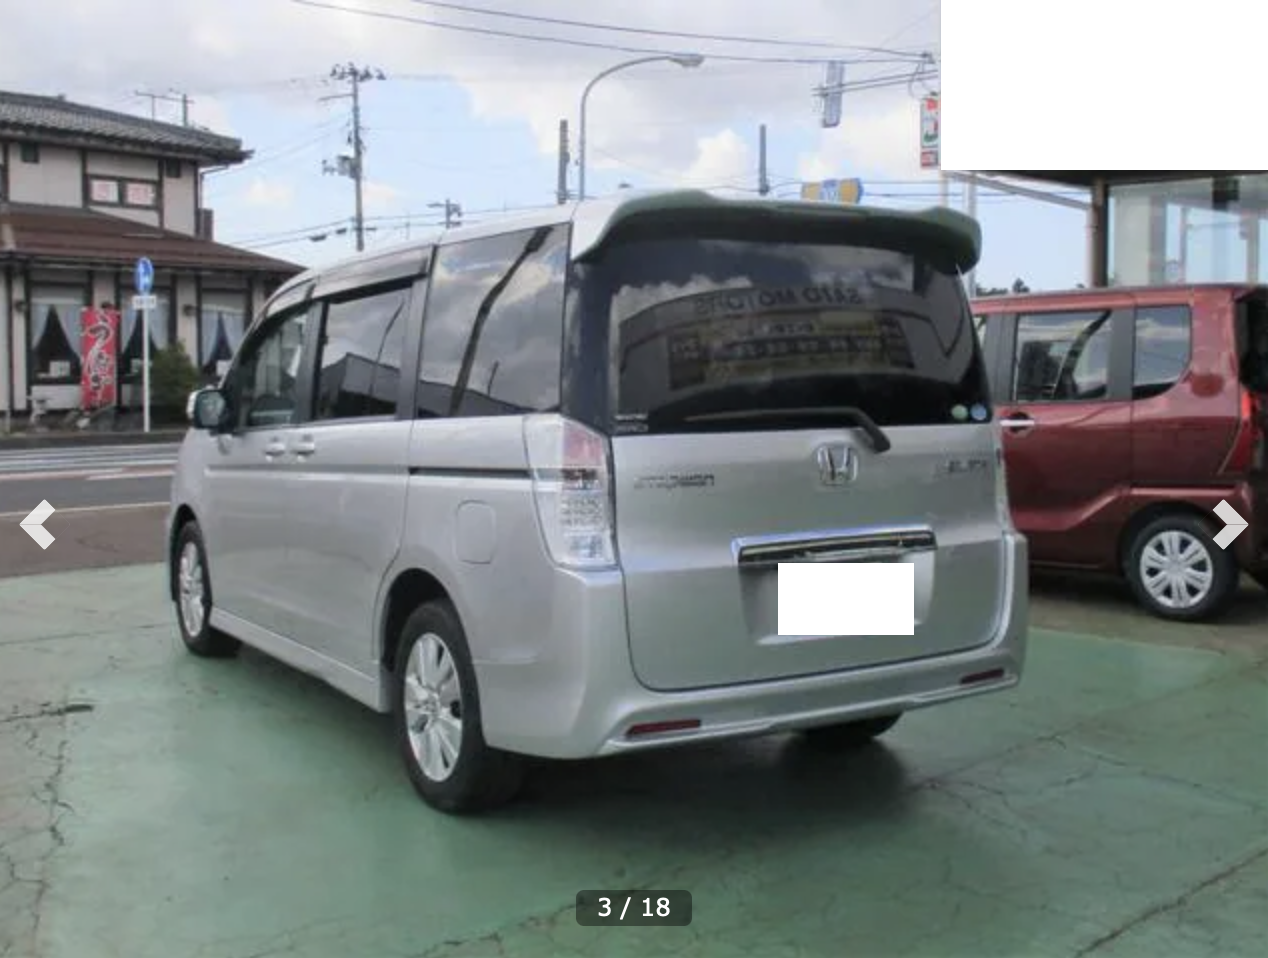 Honda Stepwagon Spada supplied for sale fully UK registered direct from Japan with V5 and Mot, algys autos best value Honda Stepwagon Spada in UK, fact